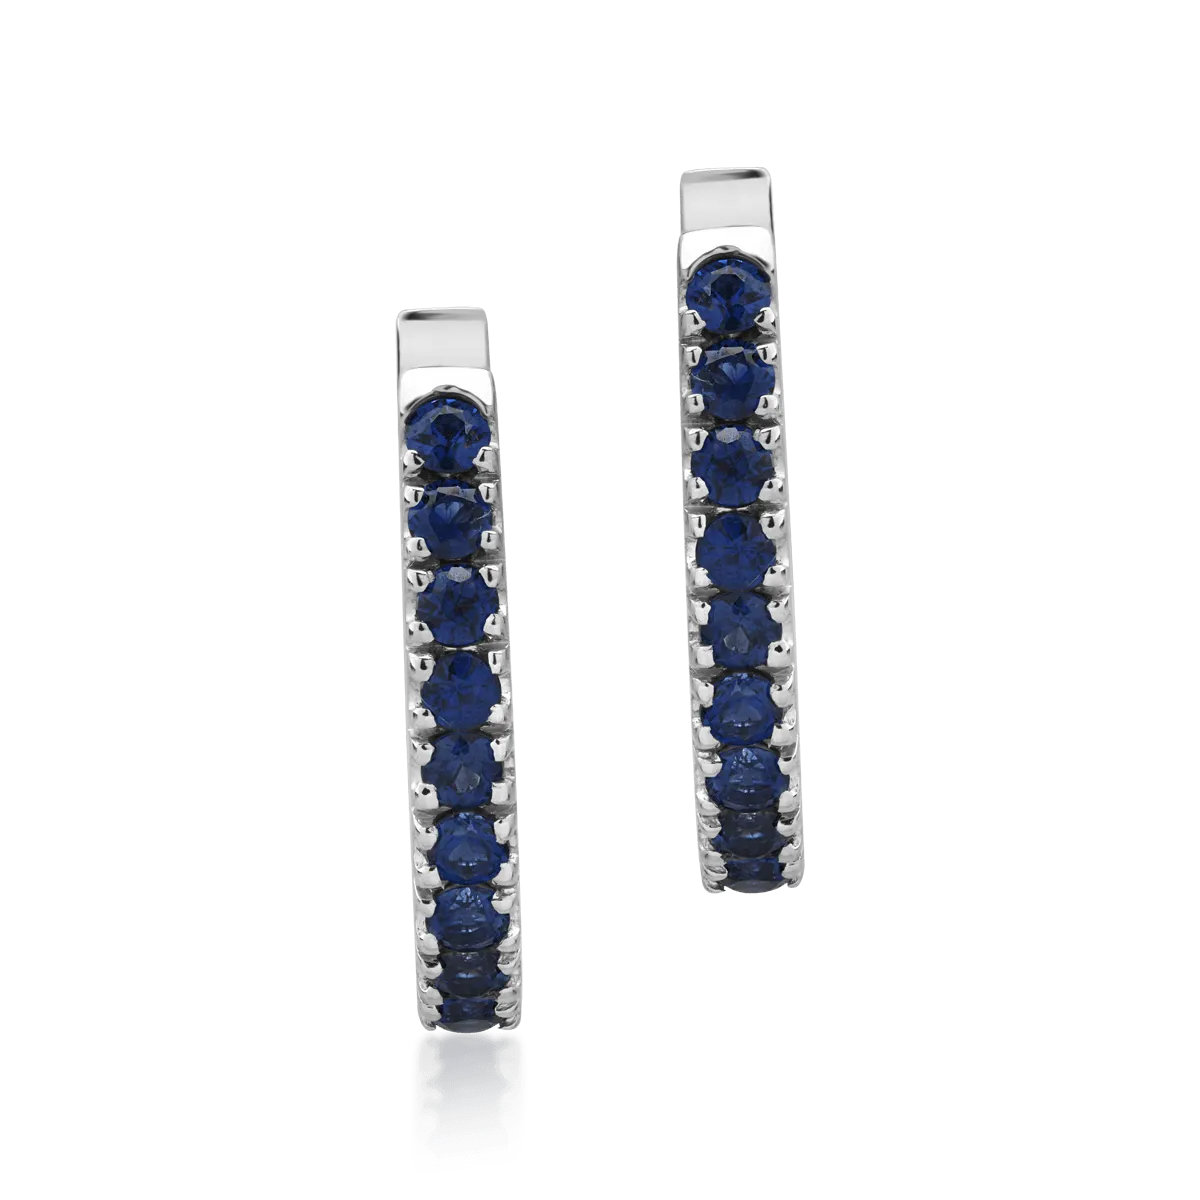 18K white gold earrings with 0.4ct sapphires